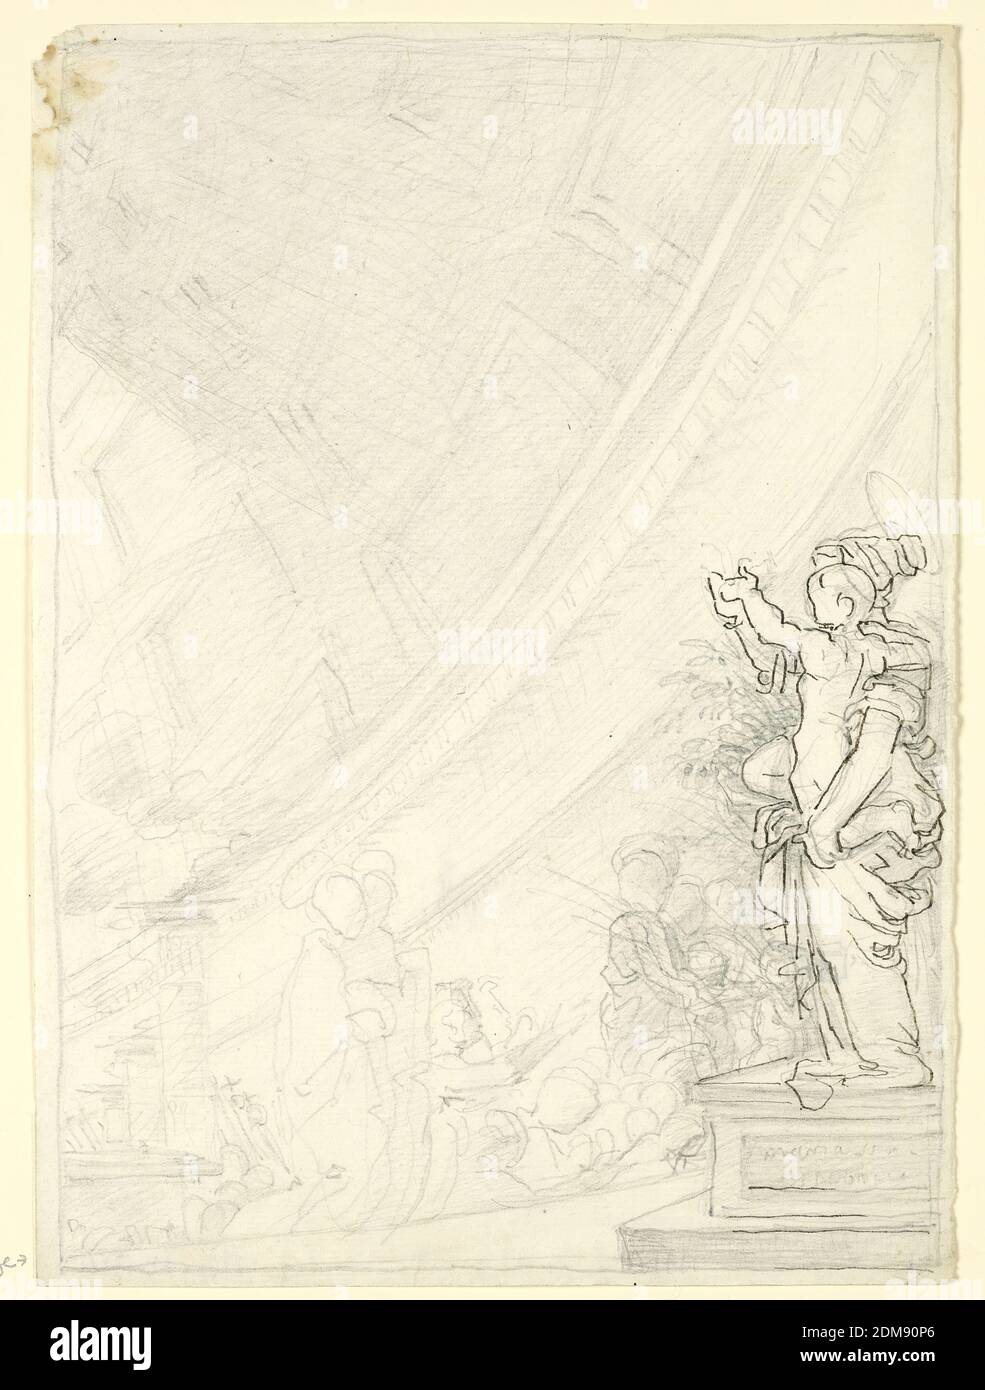 Church Procession, Fortunato Duranti, Italian, 1787 - 1863, Graphite, pen and ink on paper, On a pedestal, right, the full-length figure of the Virgin, supporting the Child on her left hand, facing left in profile. A procession of figures, a few wearing haloes, approach from the left. Perspective view of church and dome in background., Rome, Italy, ca. 1820, Drawing Stock Photo